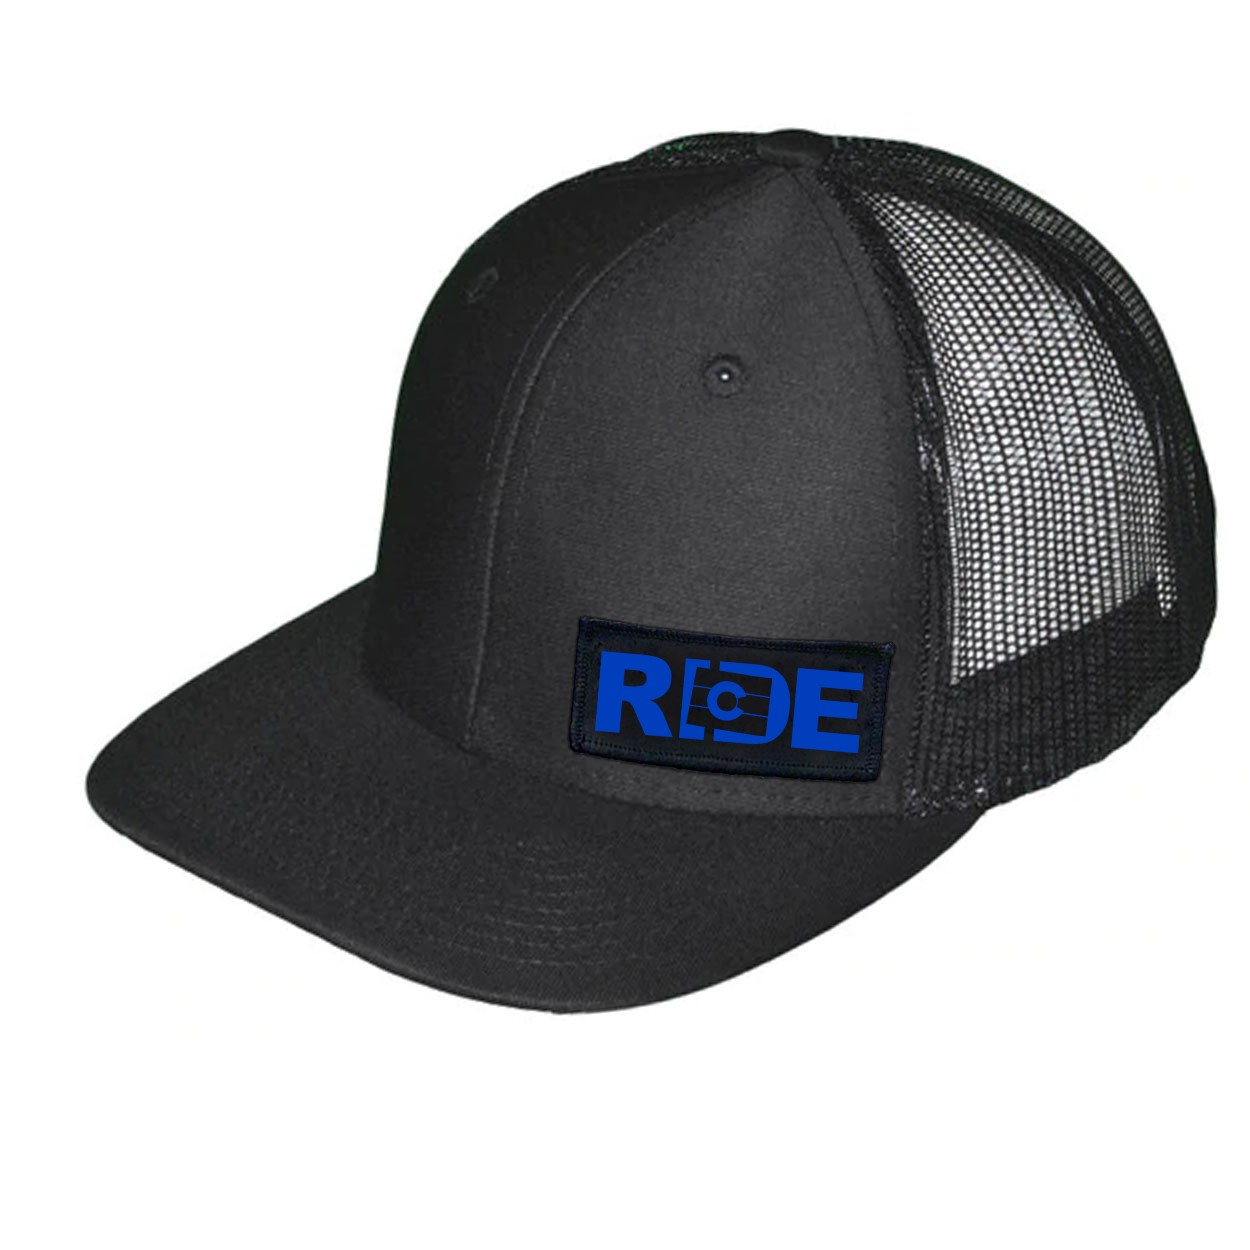 Ride Colorado Night Out Woven Patch Snapback Trucker Hat Black (Blue Logo)